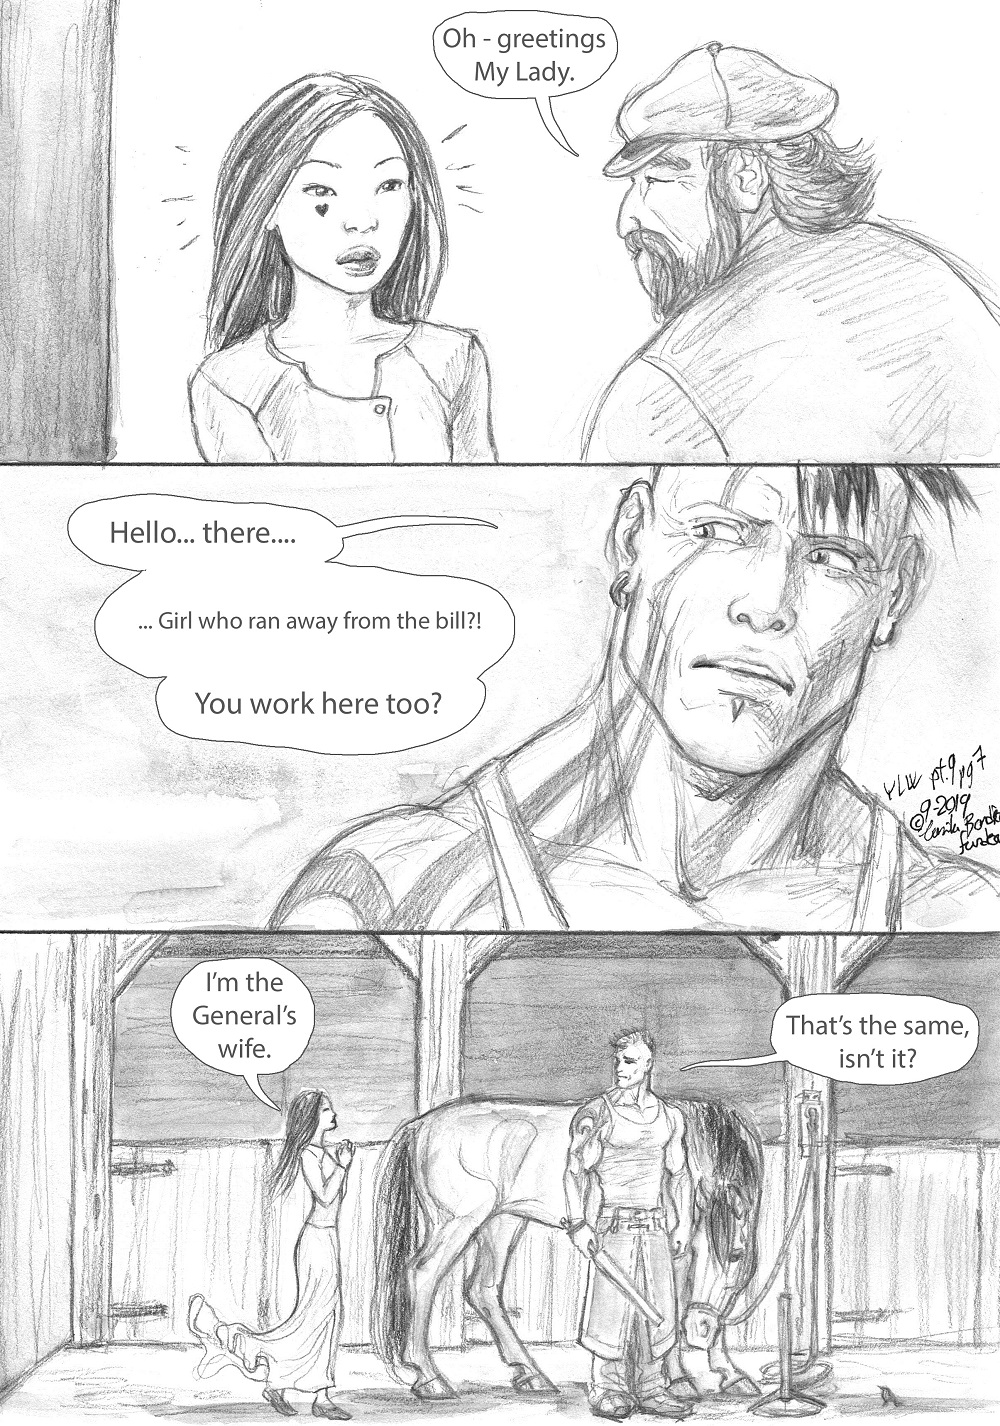 YLW_part9_A_Convenient_Coincidence_page7